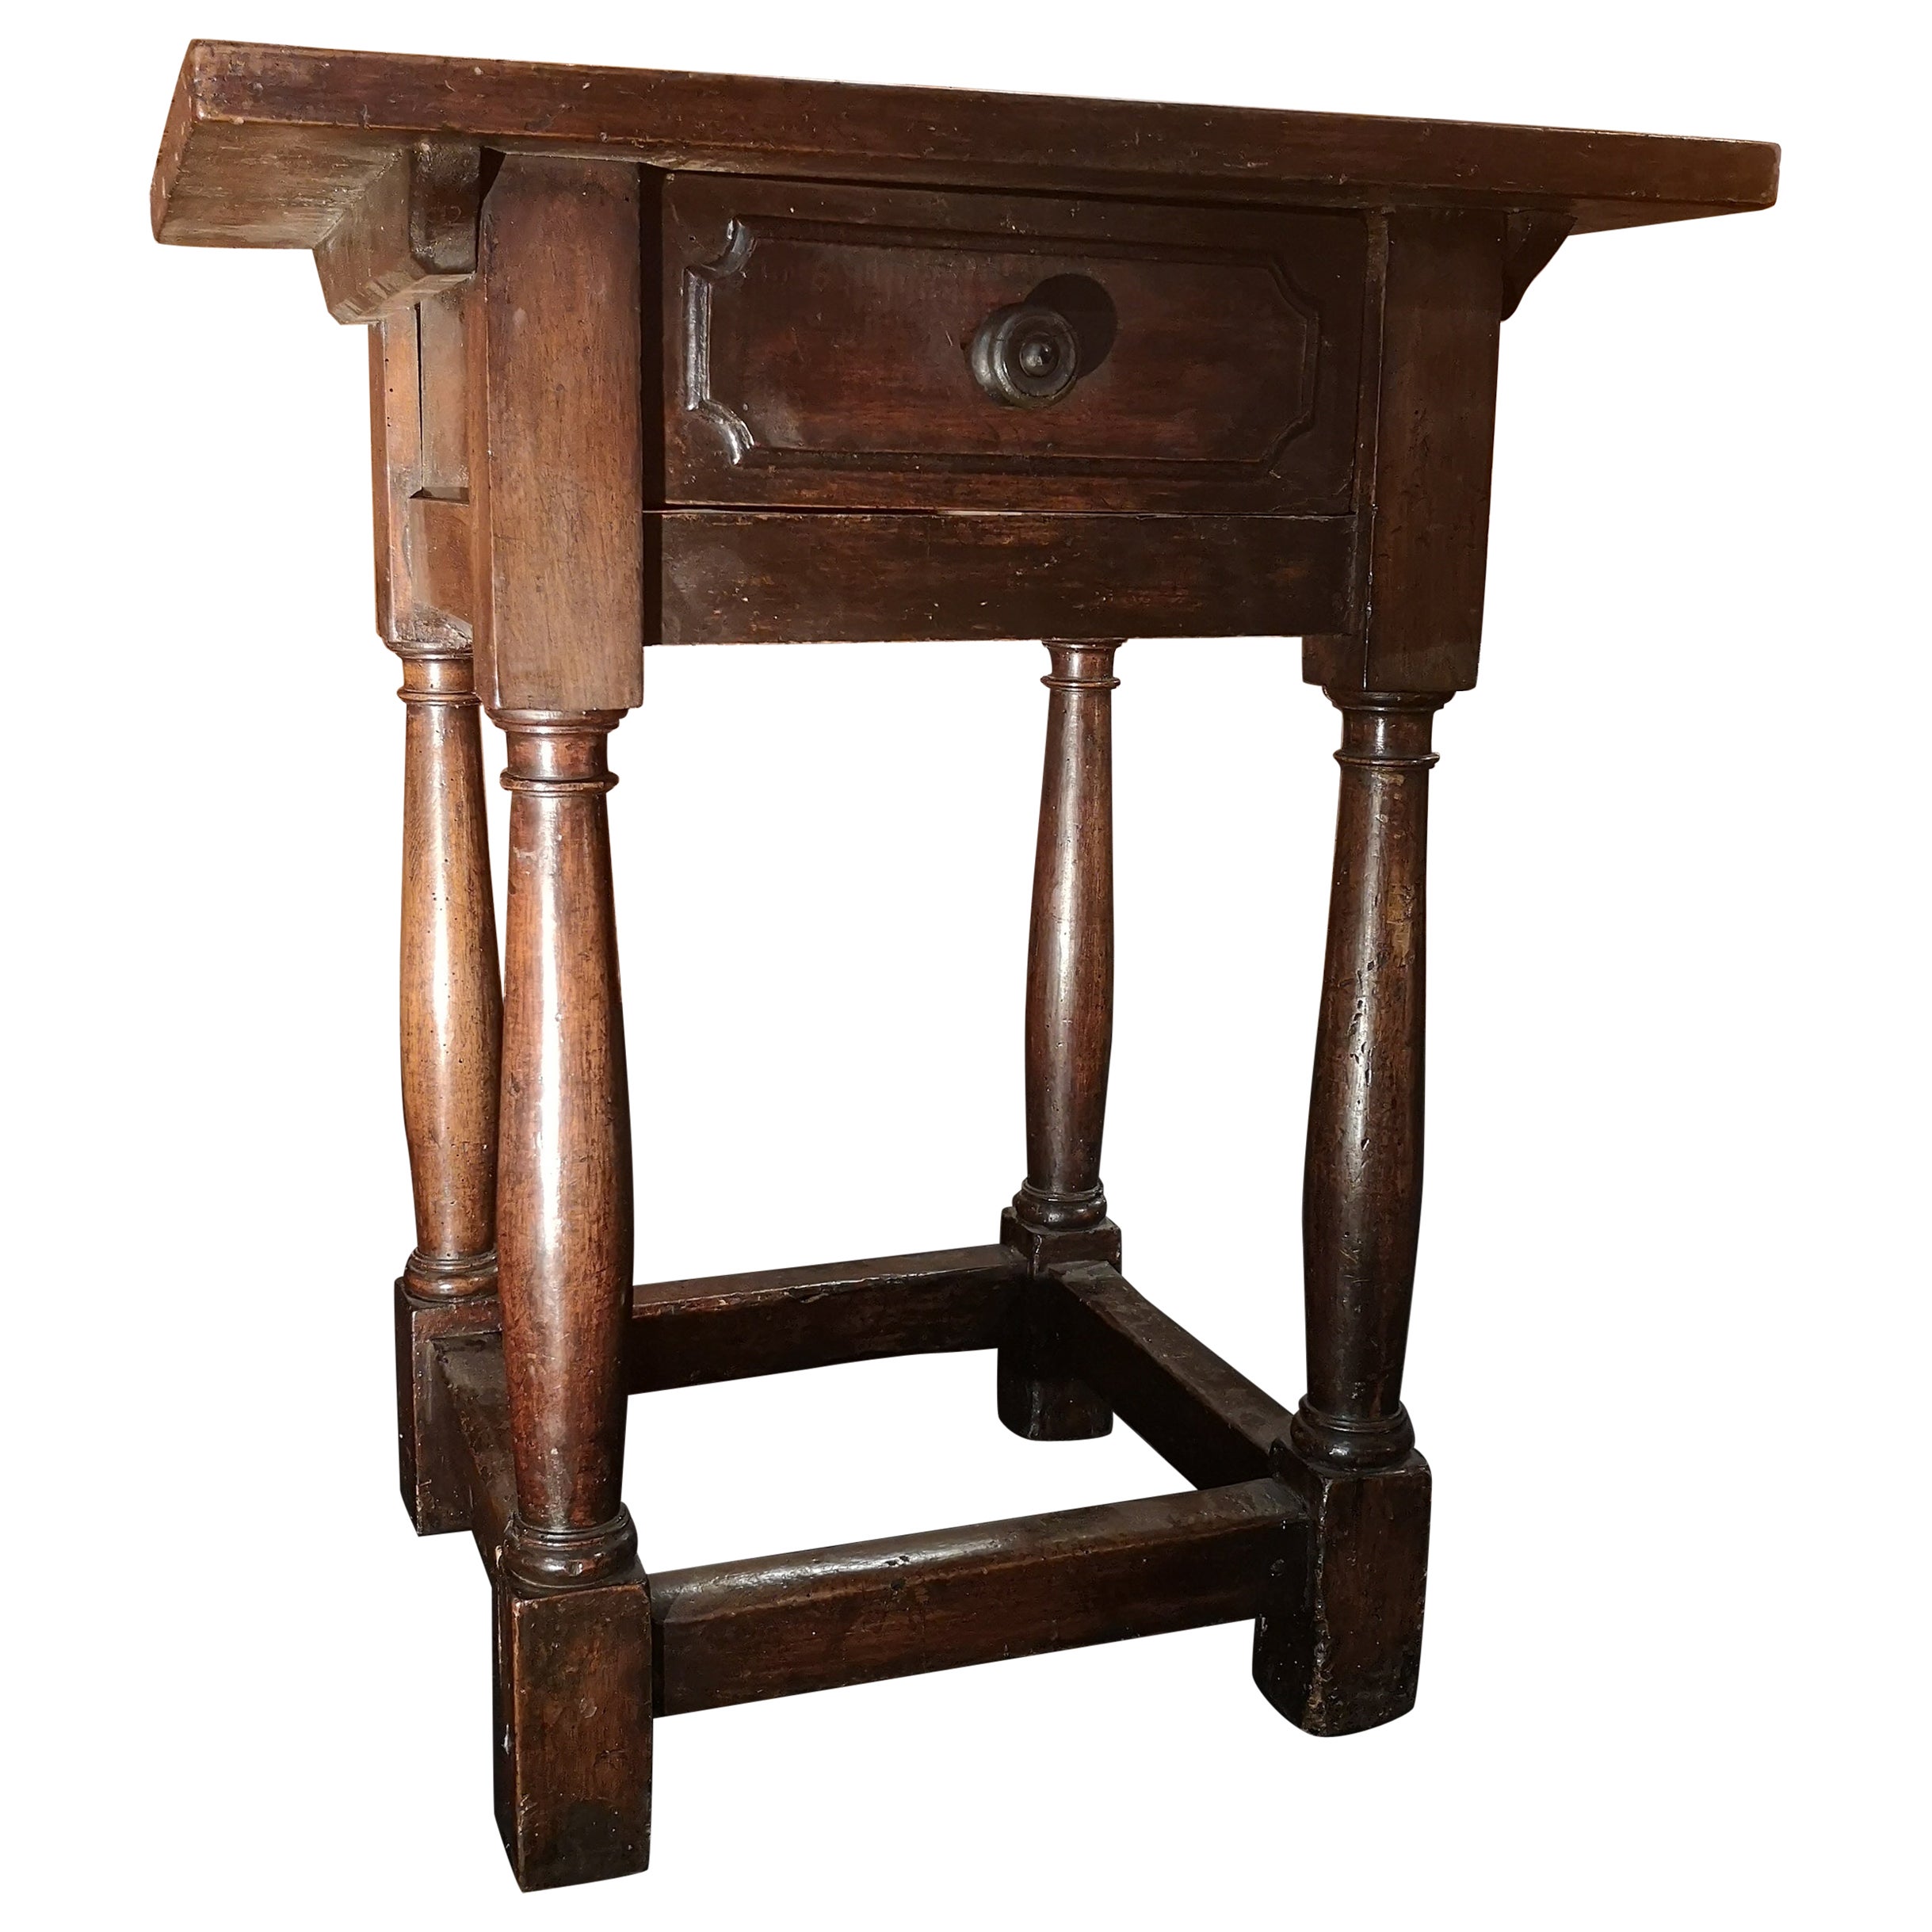 Small Tuscany Table from the Renaissance Period